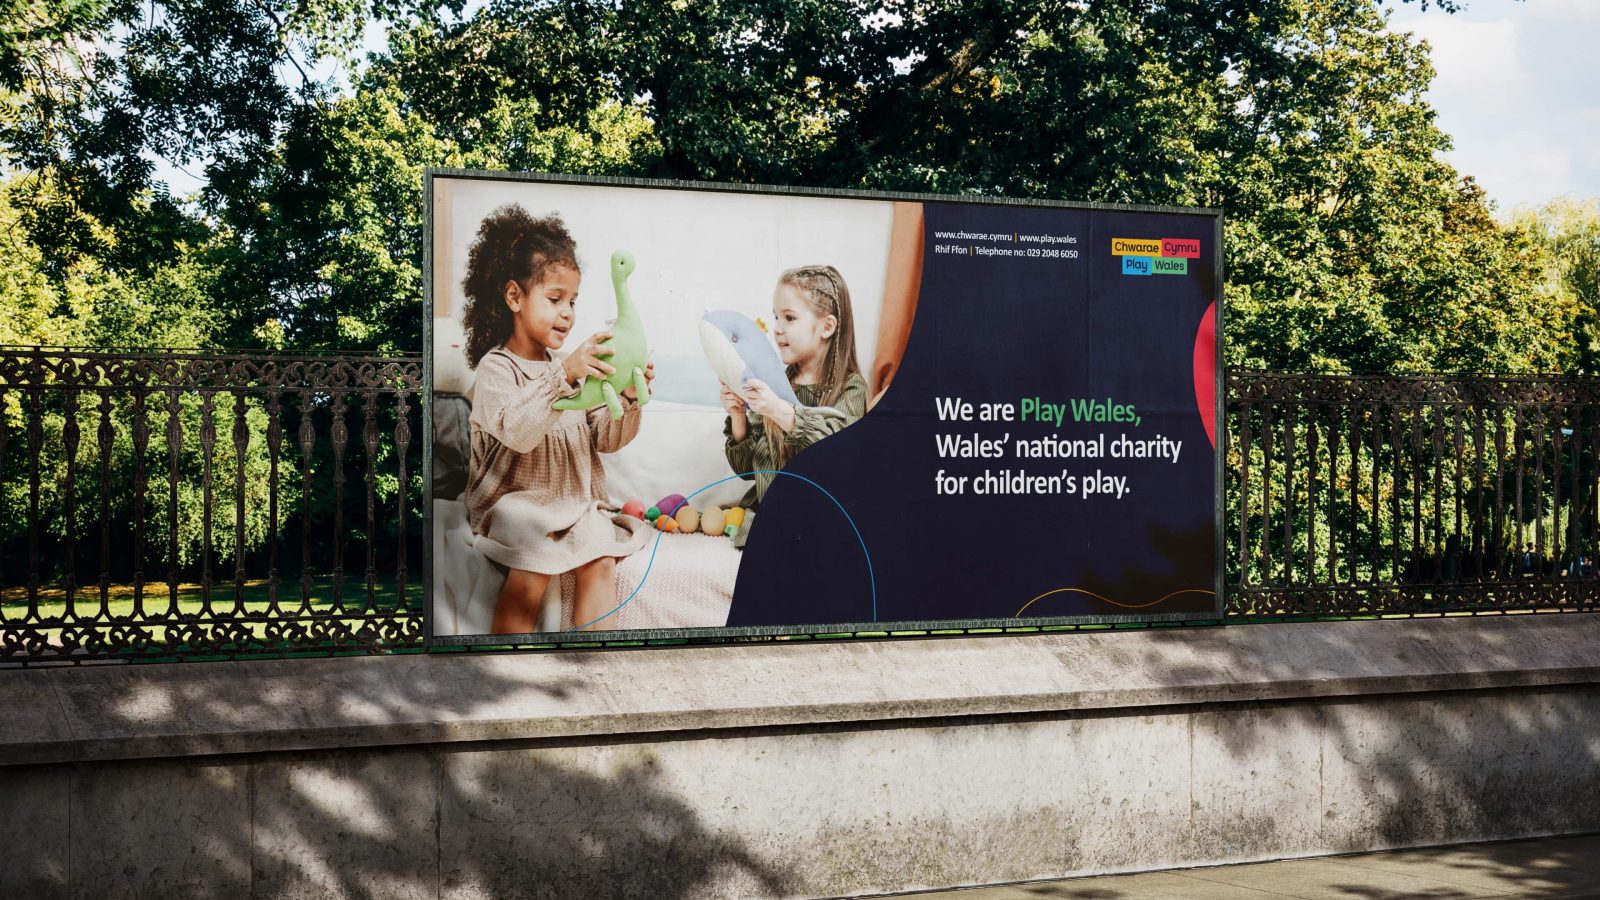 A billboard featuring two children playing happily. the left child, of african descent, holds a green toy, while the right child, caucasian, assists. text promotes play wales, a children’s charity.